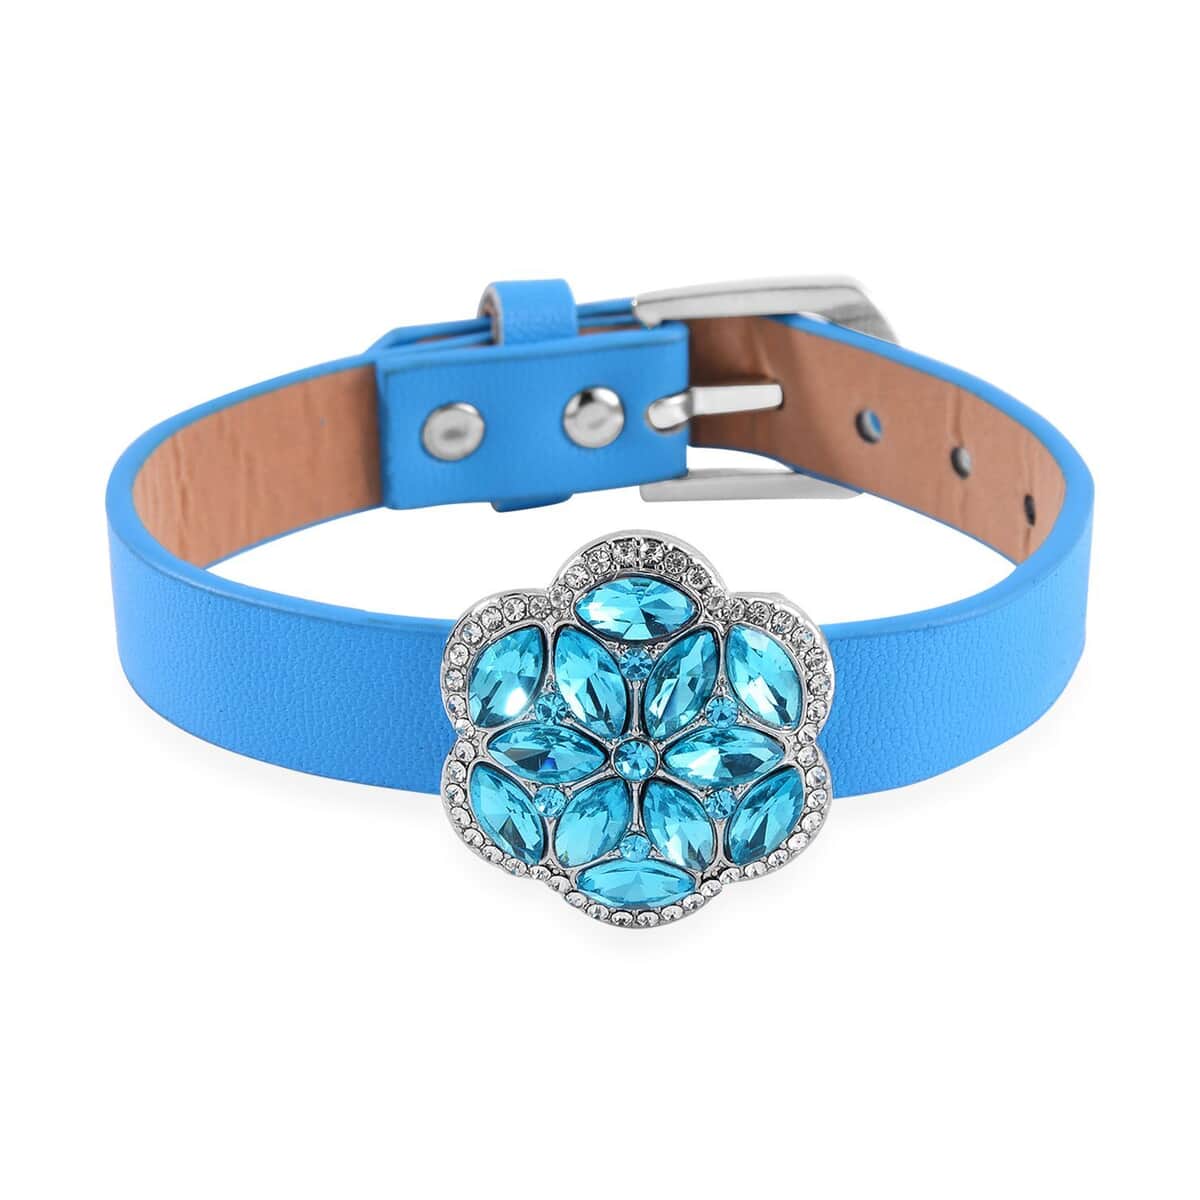 Sky Blue Color and White Austrian Crystal, Faux Leather Floral Bracelet (6-8In), Earrings, Ring (Size 8.0) and Pendant Necklace 20-22 Inches In Silvertone image number 3